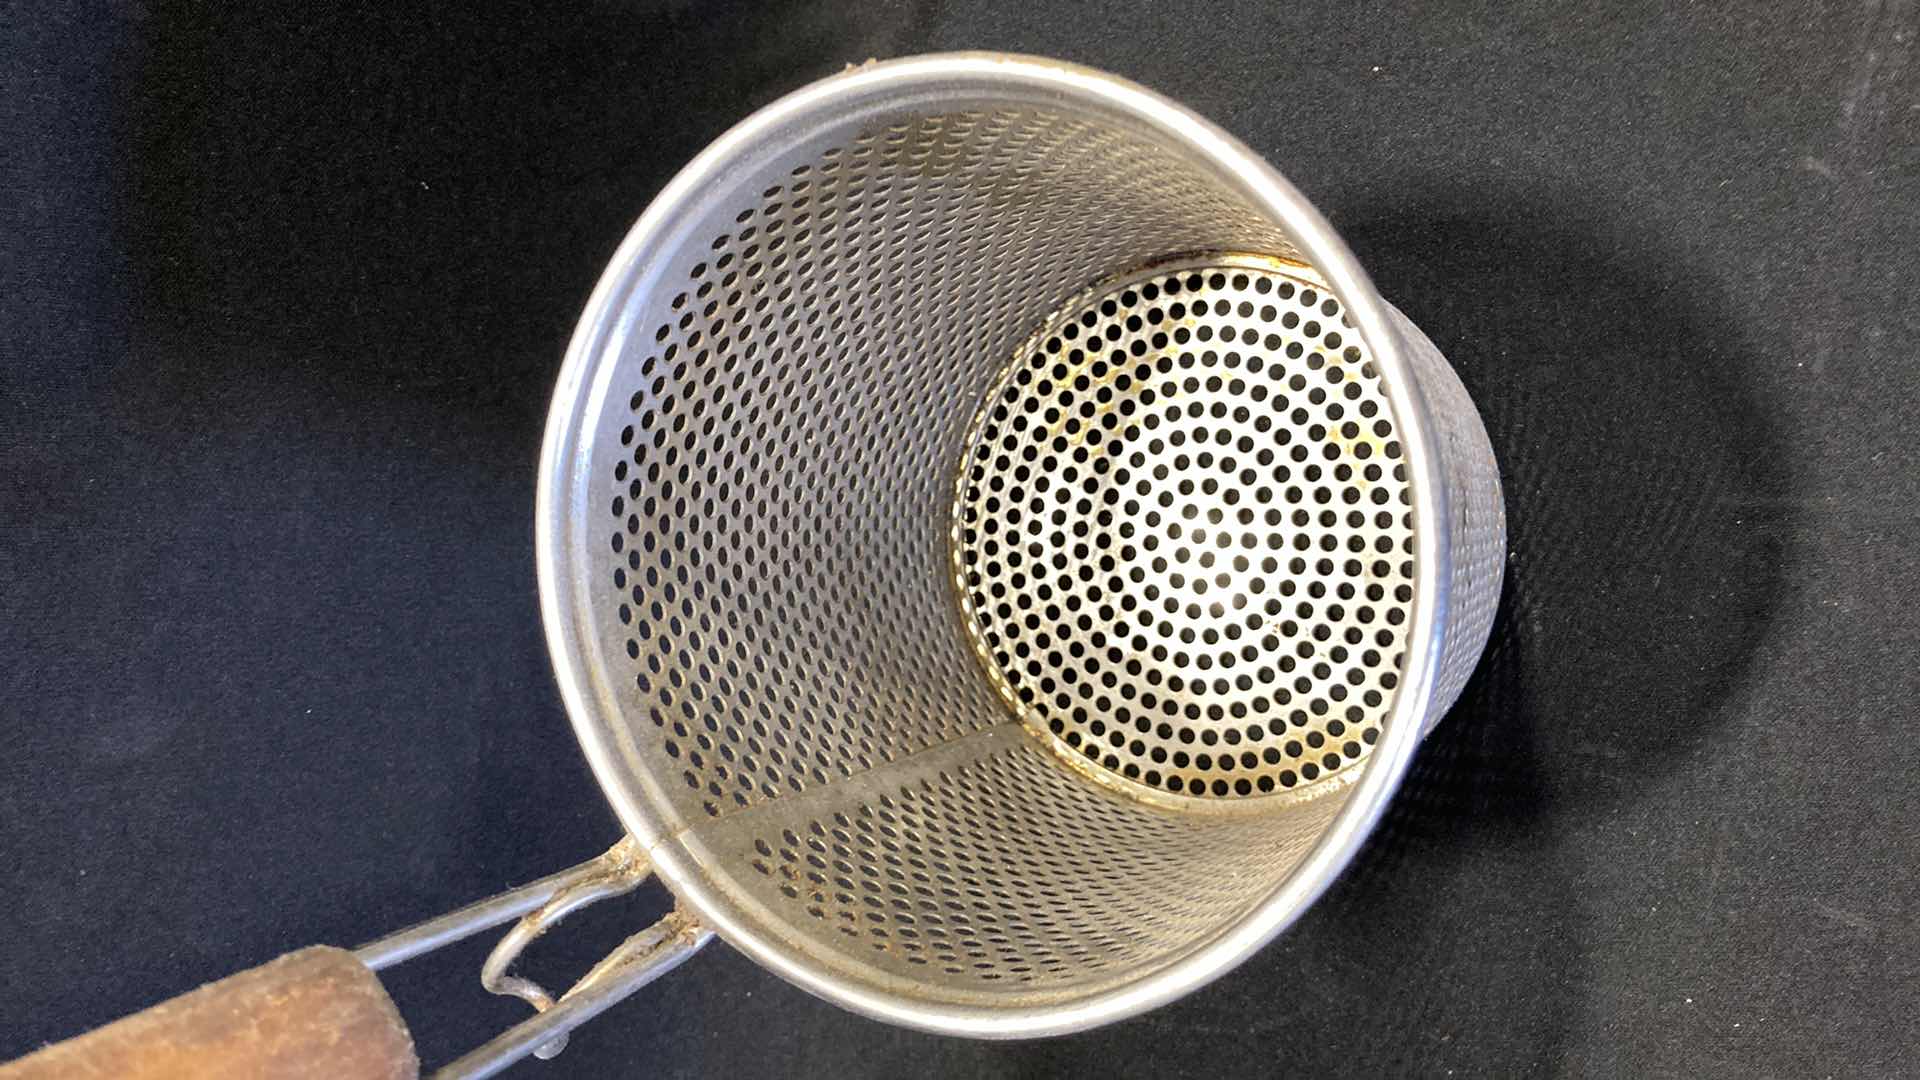 Photo 3 of STAINLESS STEEL PASTA COOKING BASKET 5.5” X 14.5”